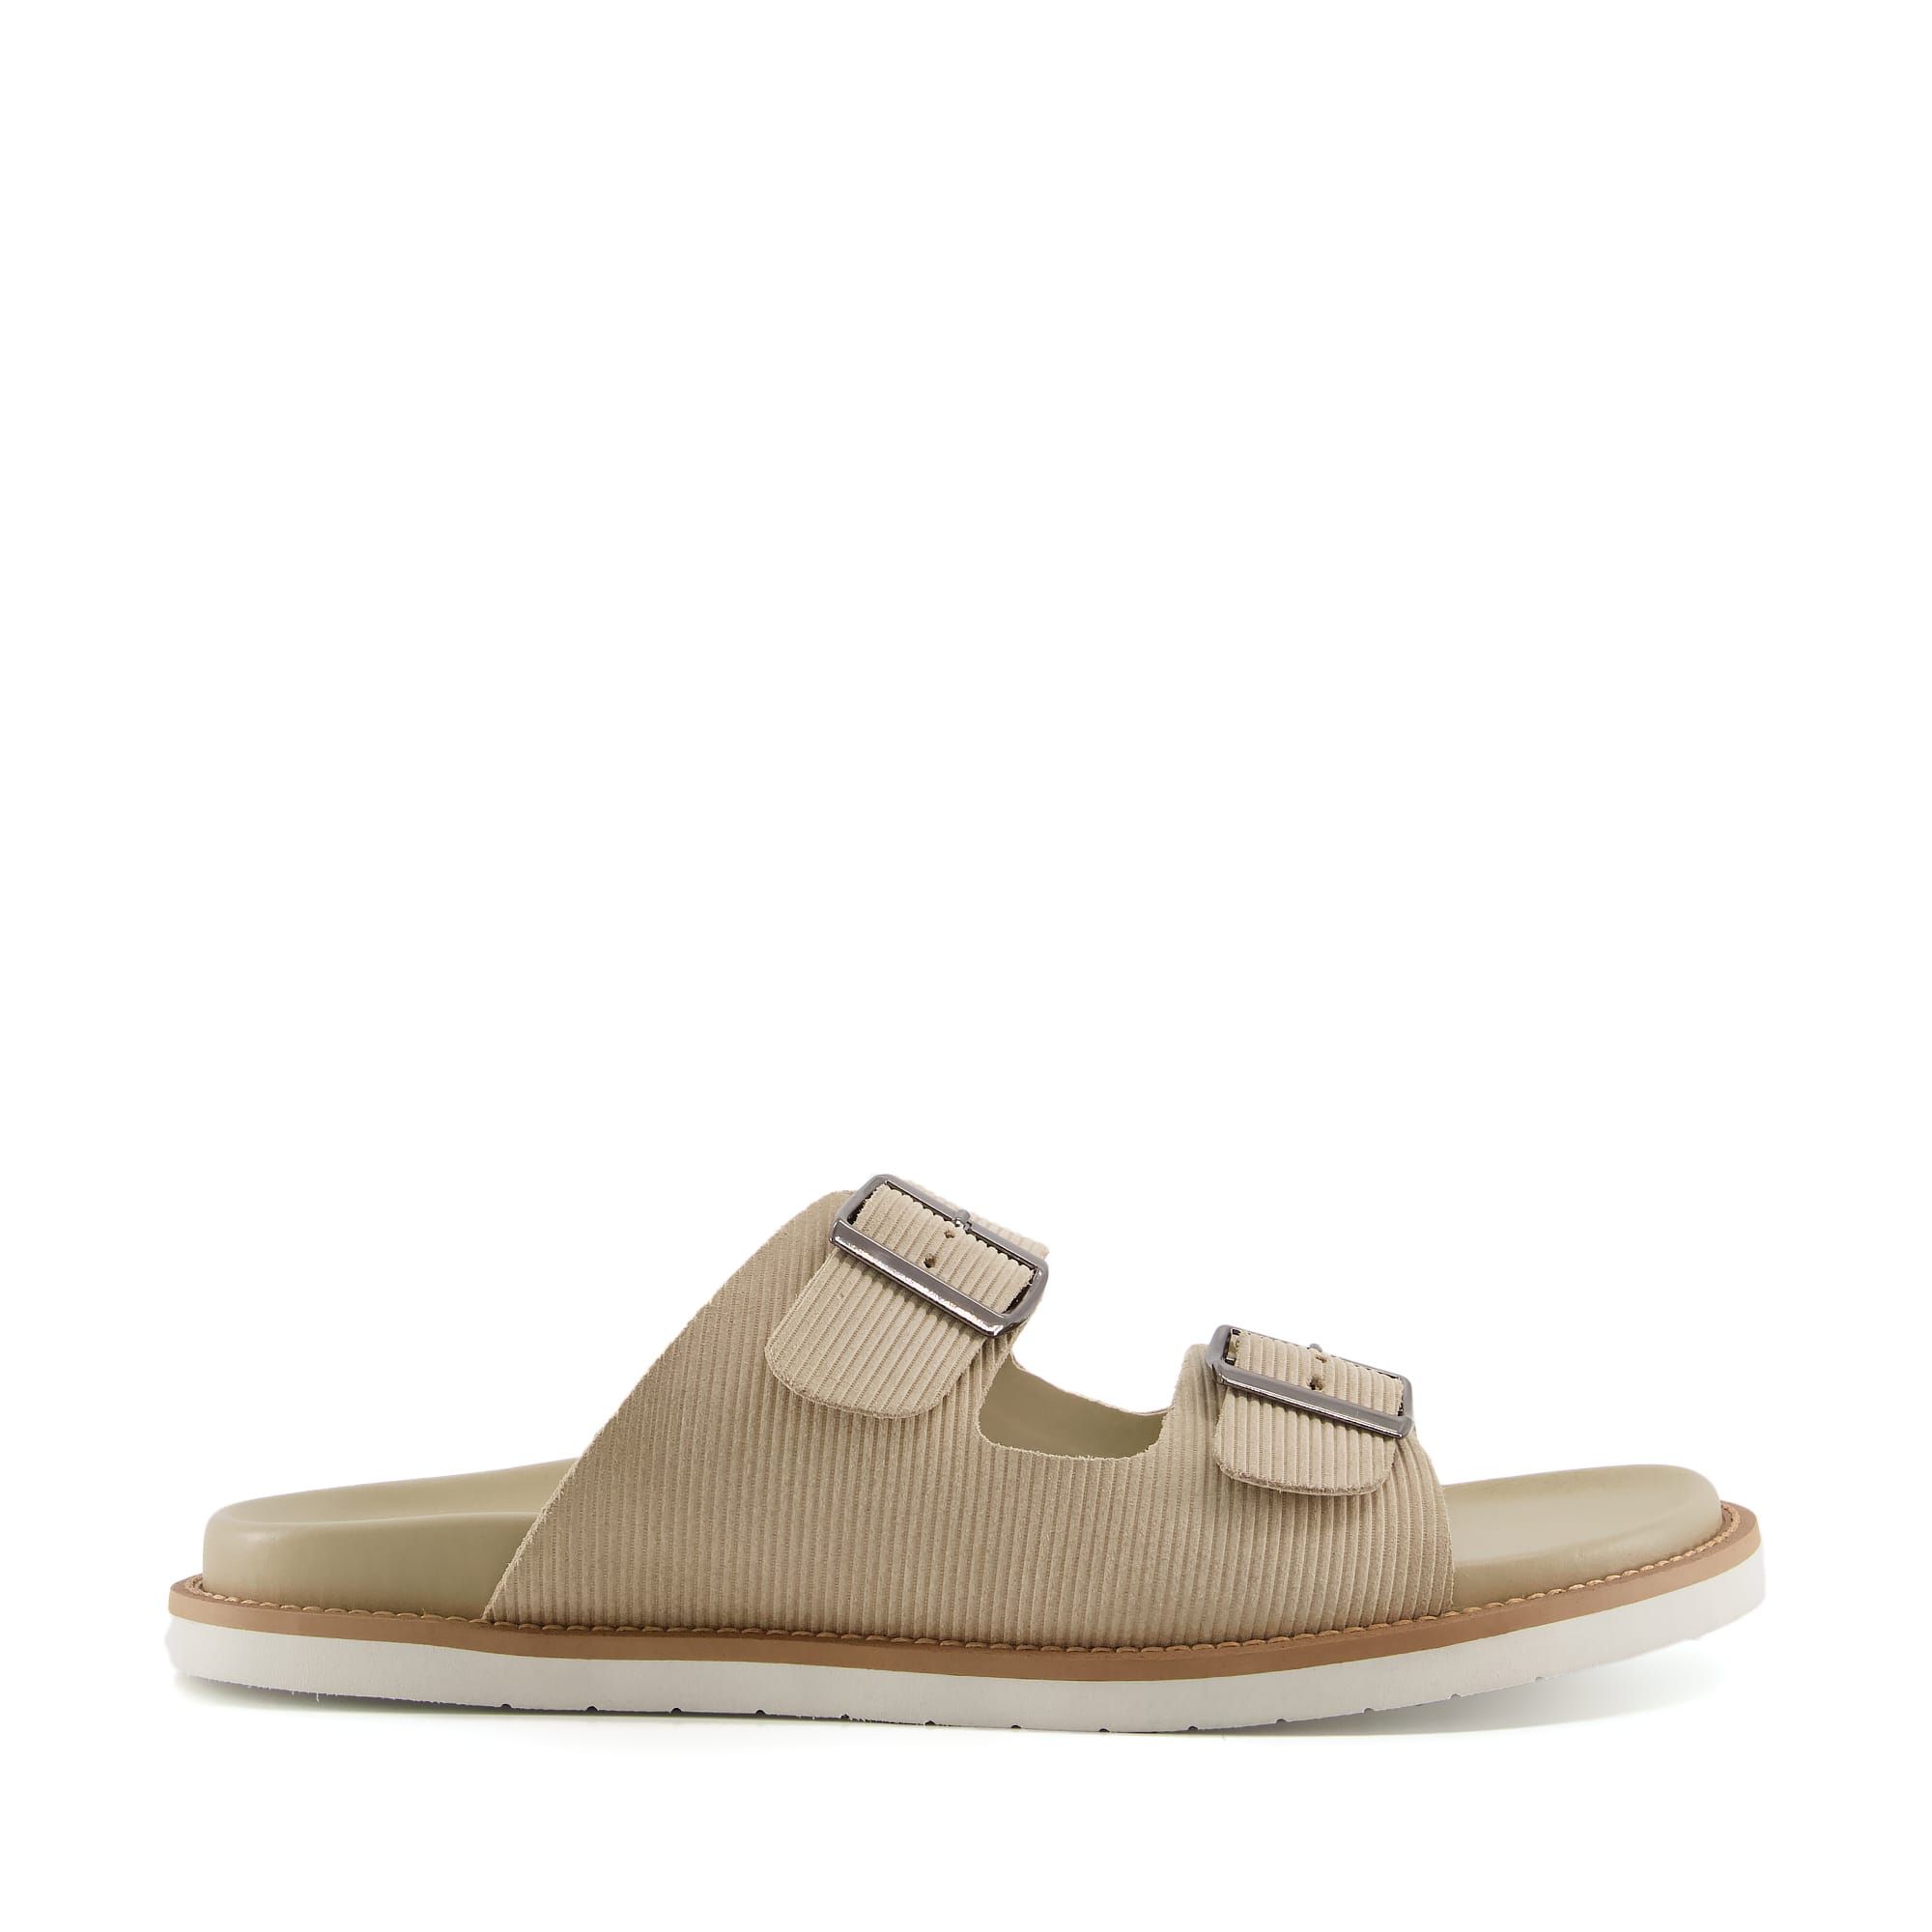 Meet the sandals you'll be wearing on repeat this summer. Comfortable and stylish, they feature soft leather straps and a moulded footbed. You will never want to take them off.